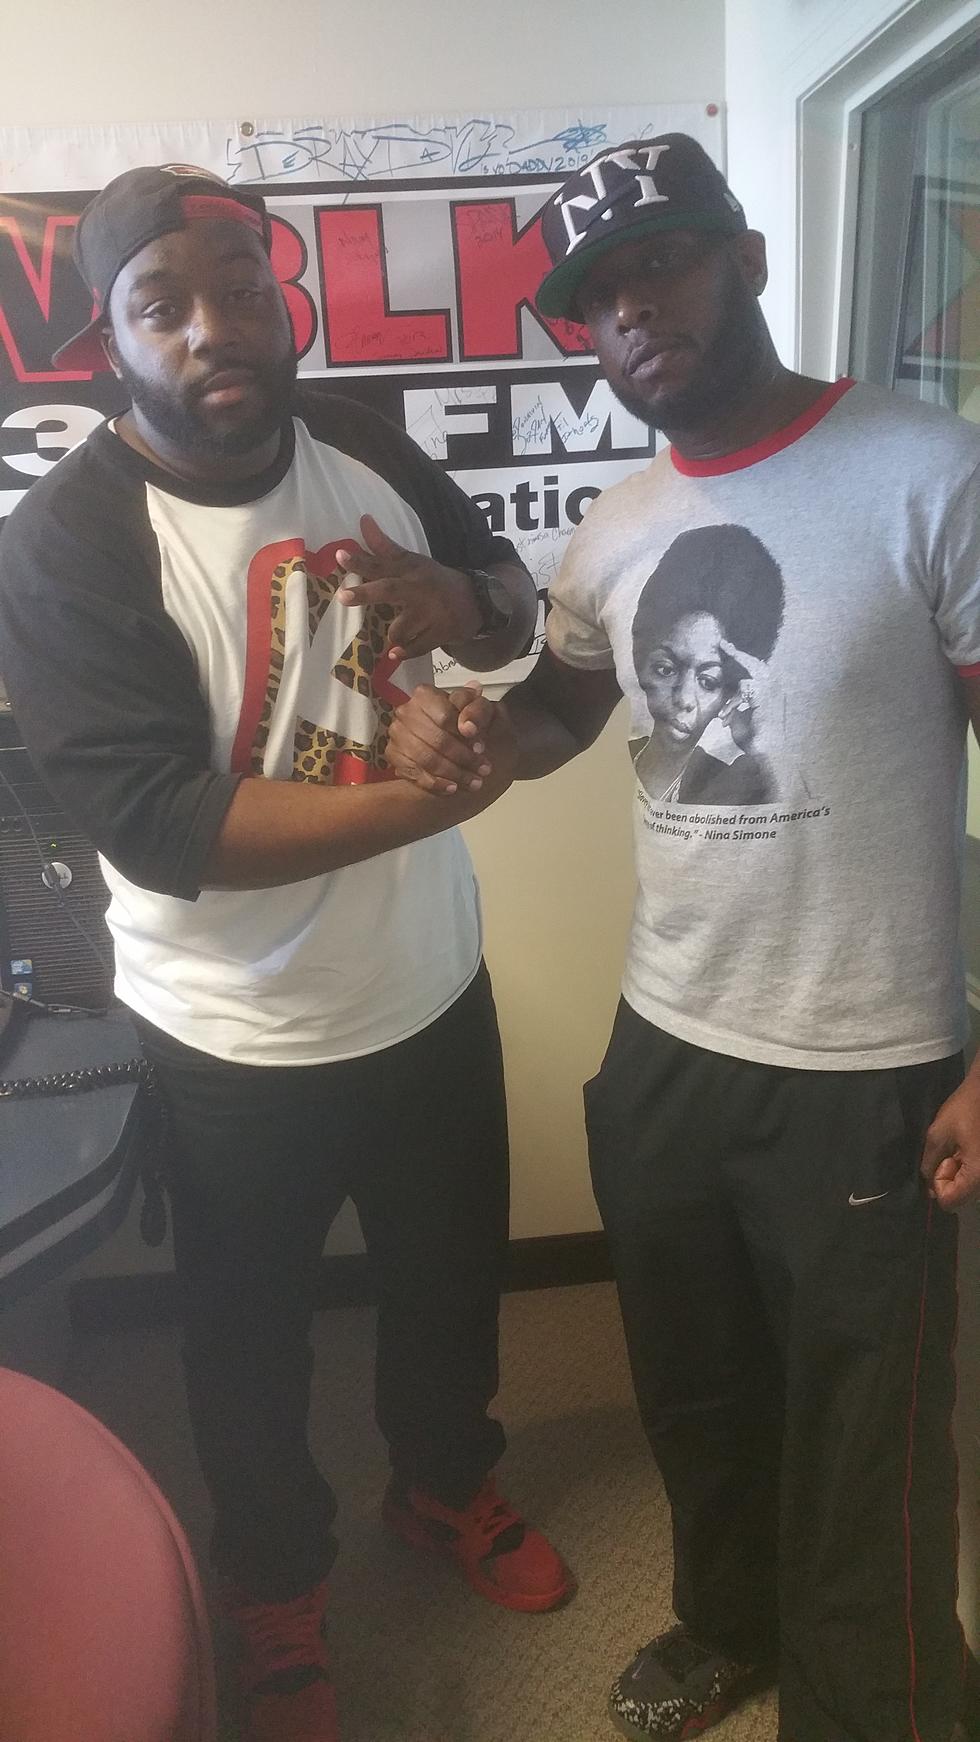 Talib Kweli Talks to DJ Big Rob About the Confederate Flag, Racism and Hip Hop [FULL INTERVIEW]